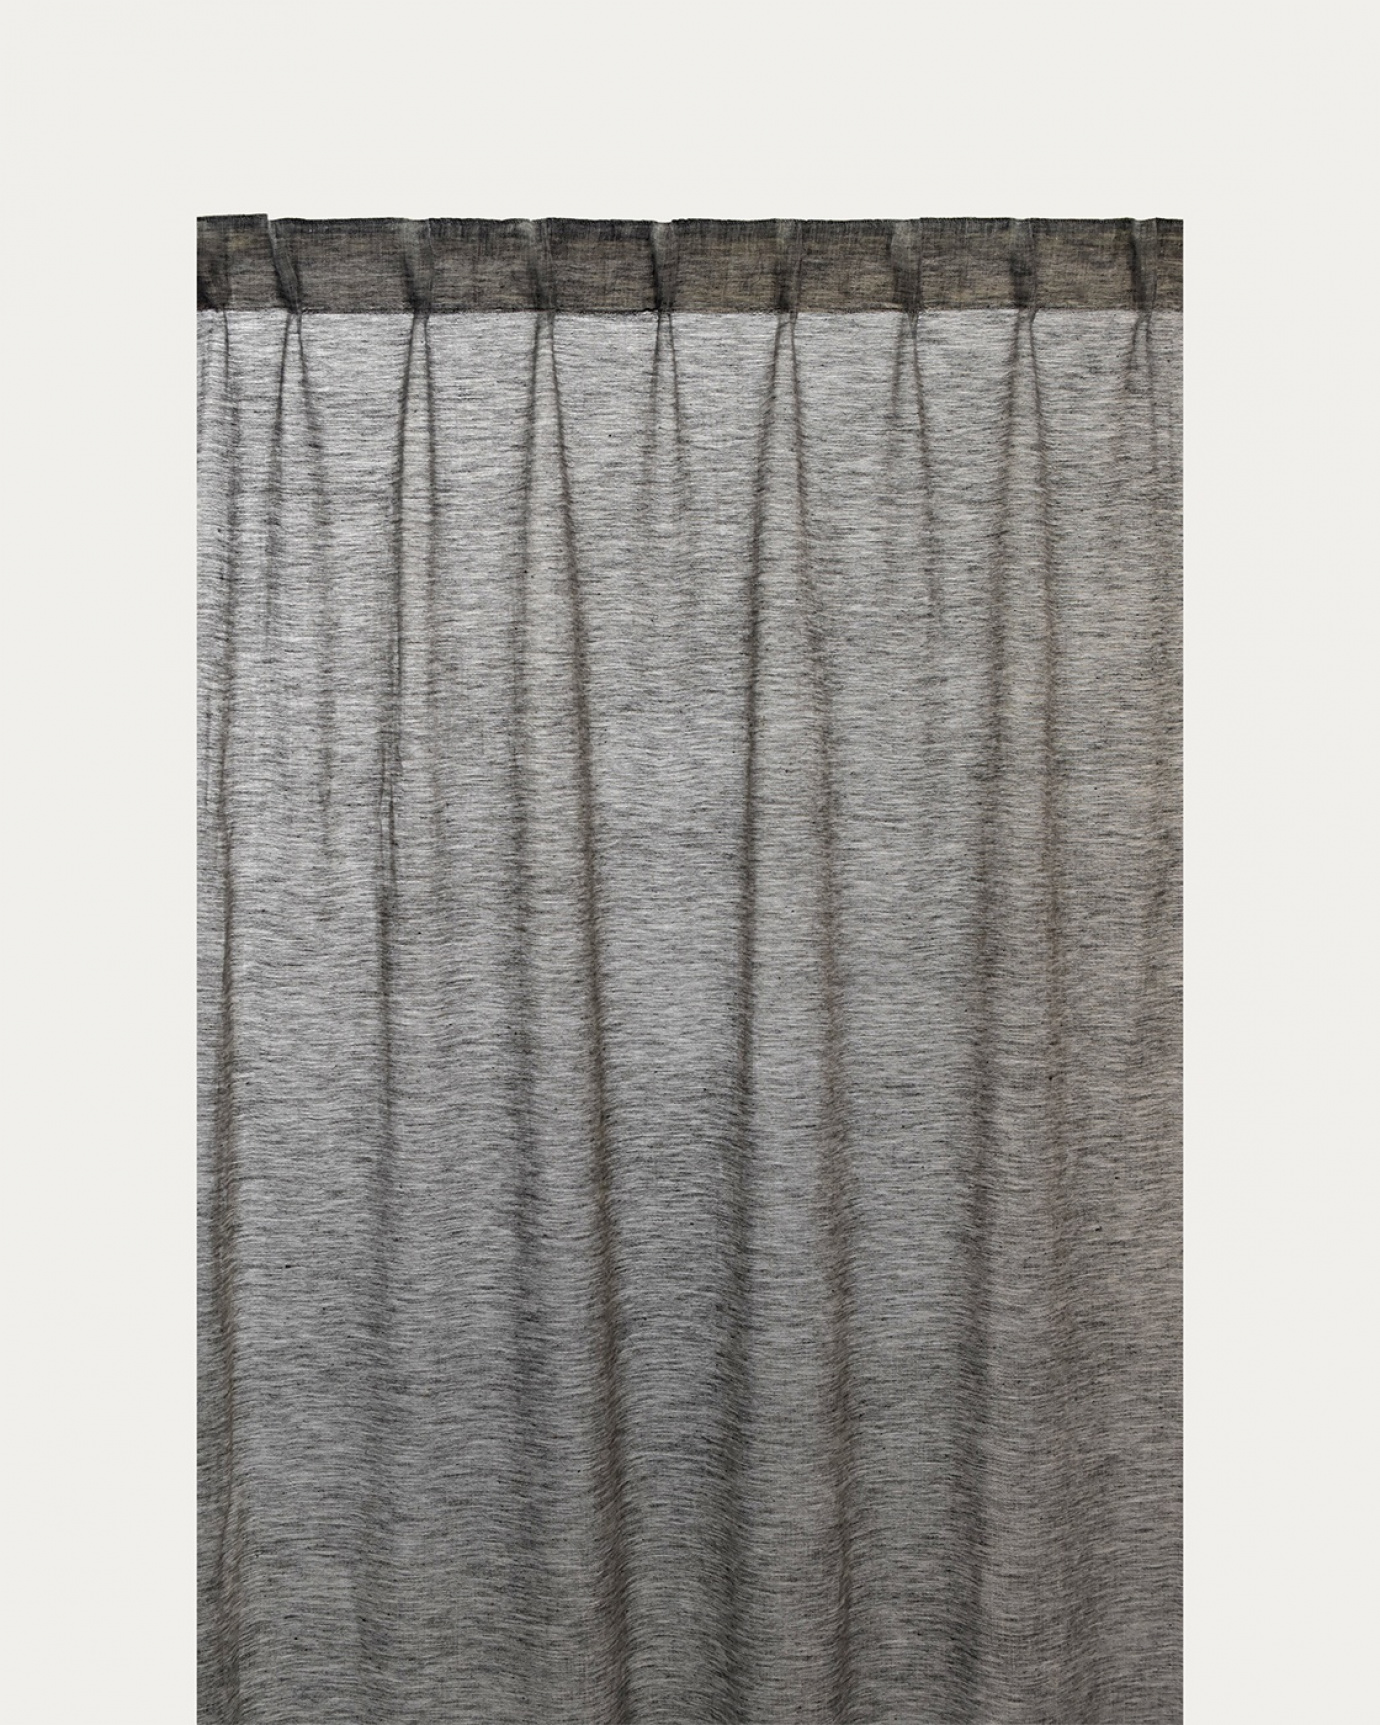 Product image dark charcoal grey INTERMEZZO curtain of sheer linen with finished pleat tape from LINUM DESIGN. Size 140x290 cm and sold in 2-pack.